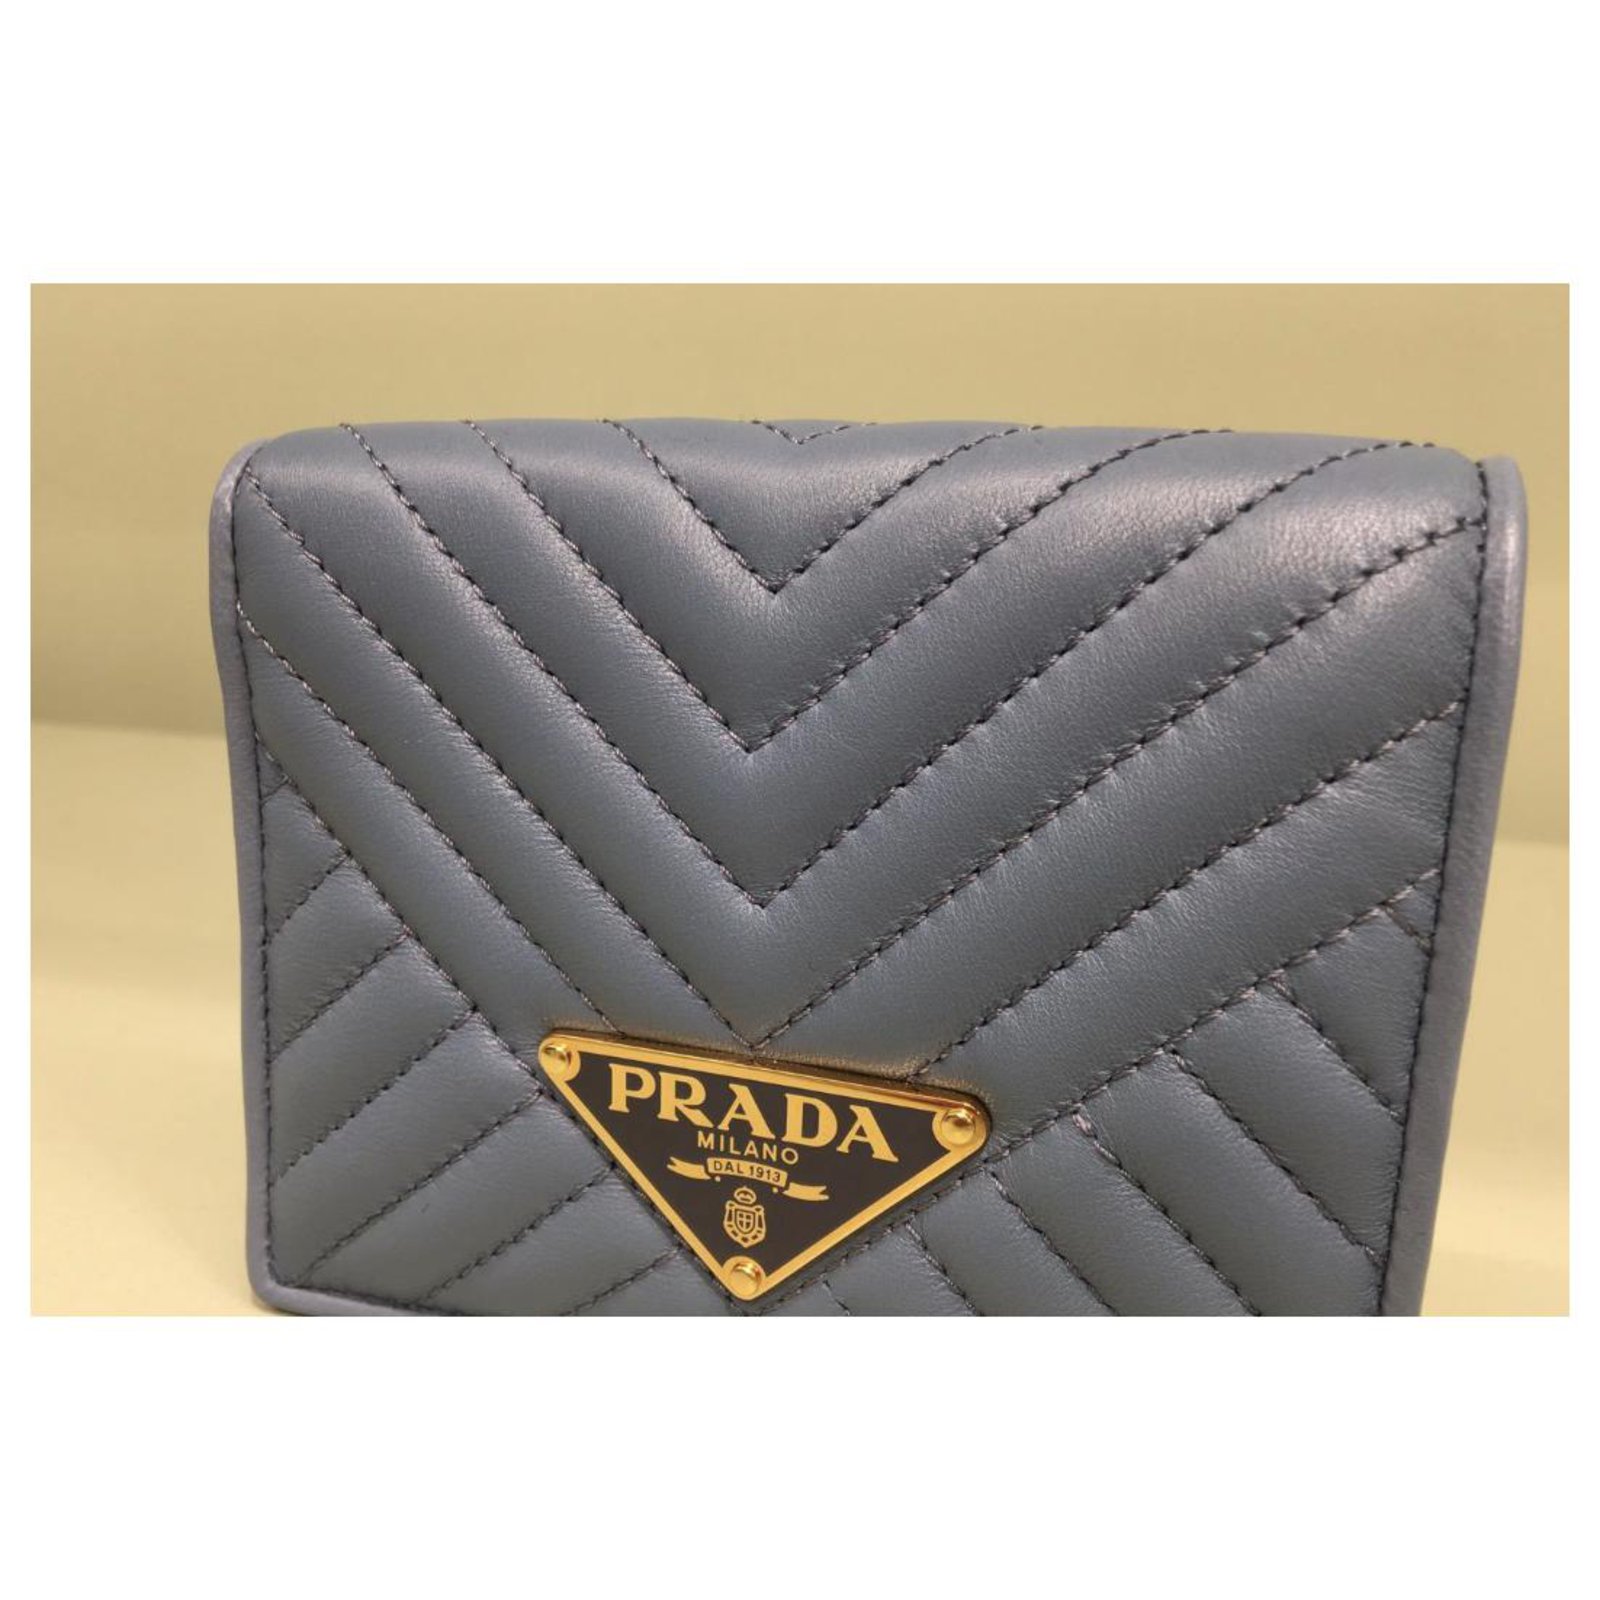 Prada Brown Cannella Zip Saffiano Leather Wallet – I MISS YOU VINTAGE